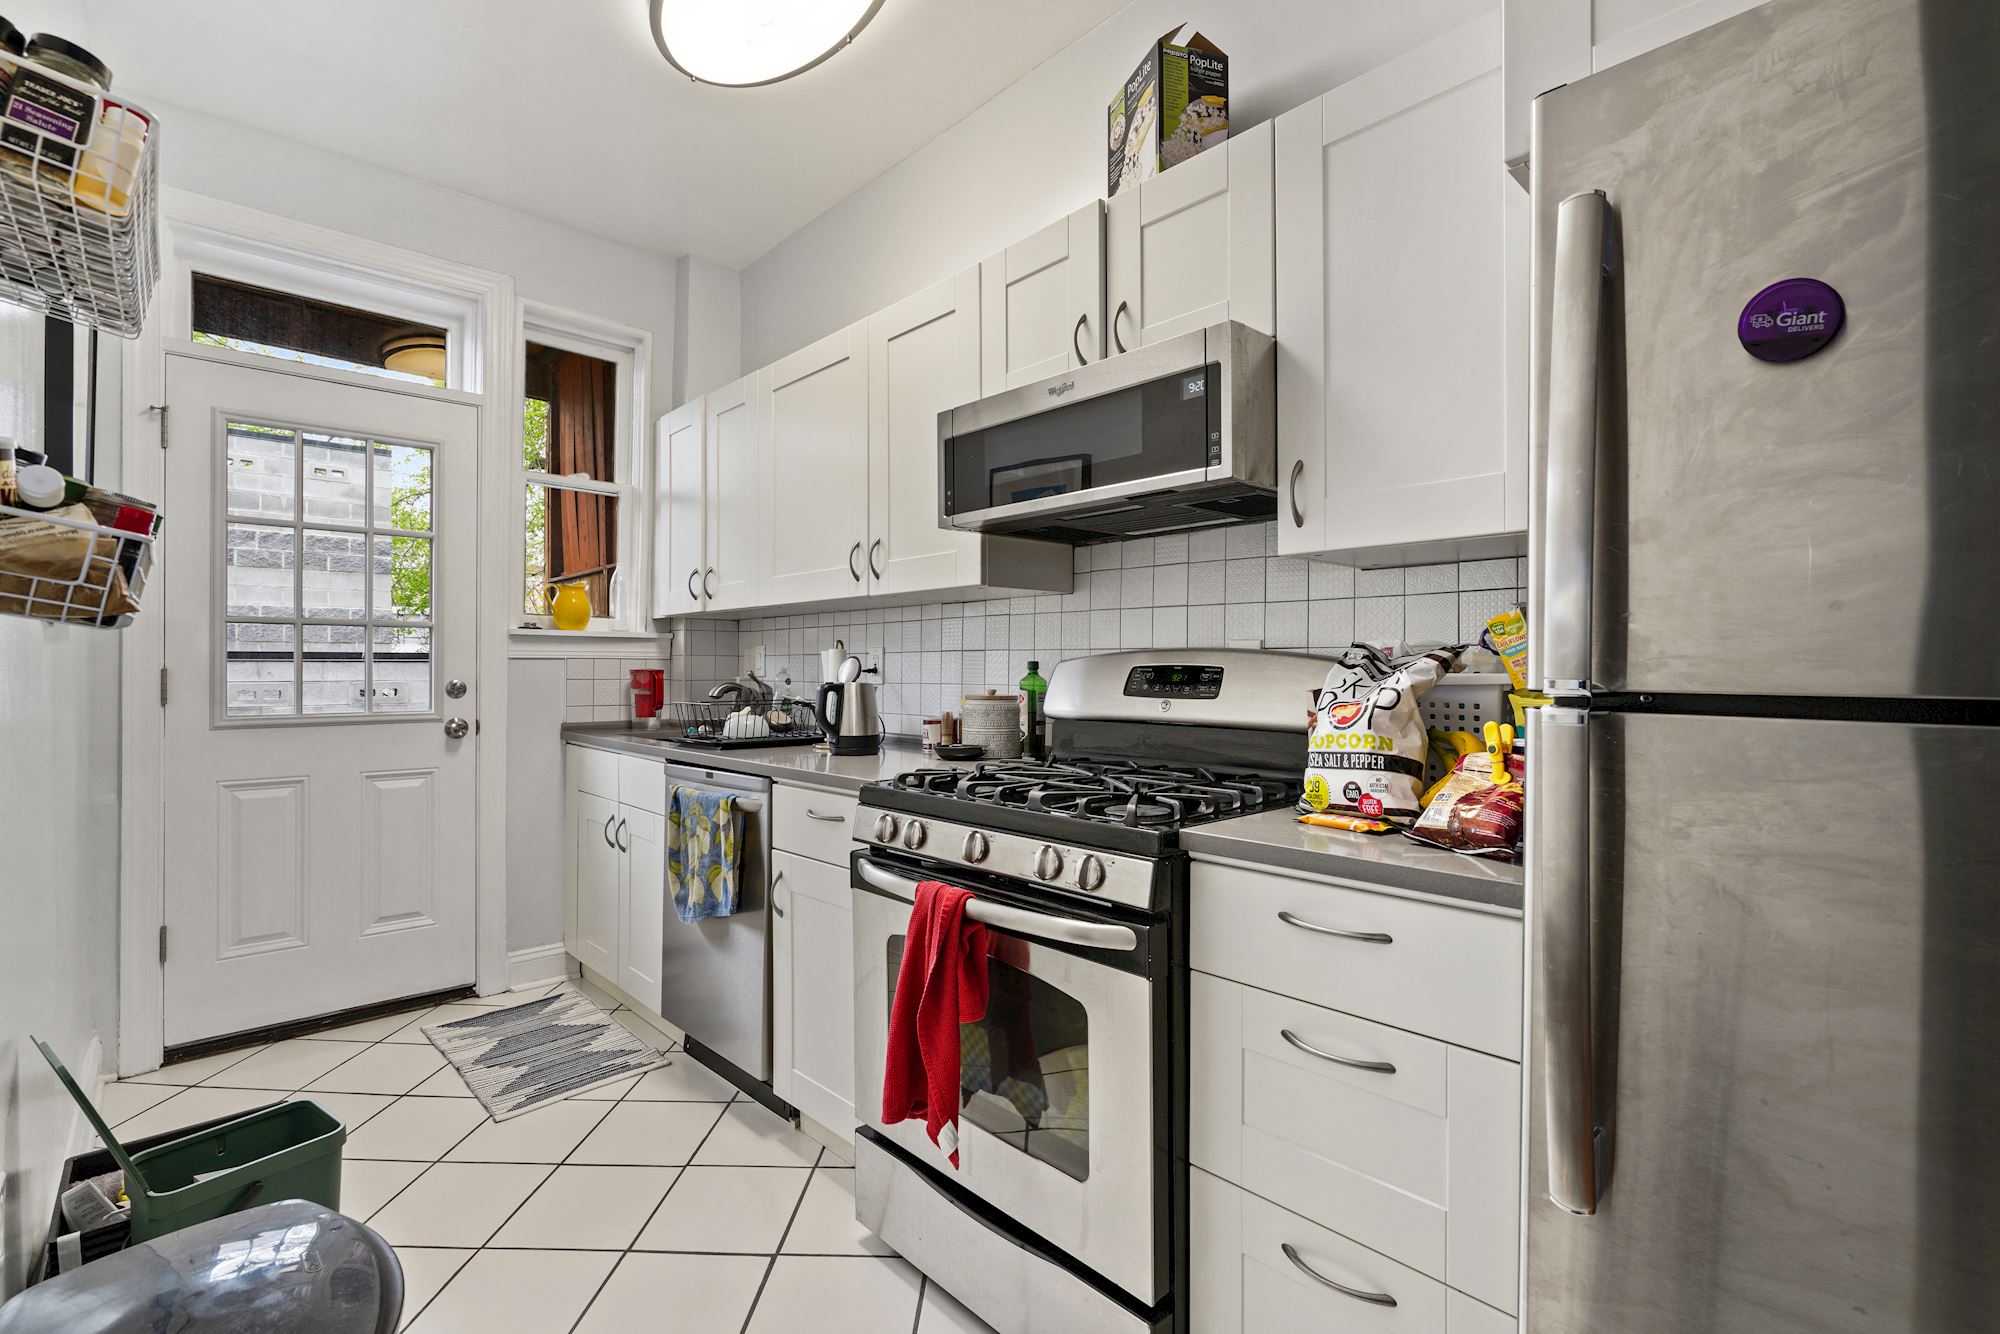 With stylish quartz countertops and stainless steel appliances